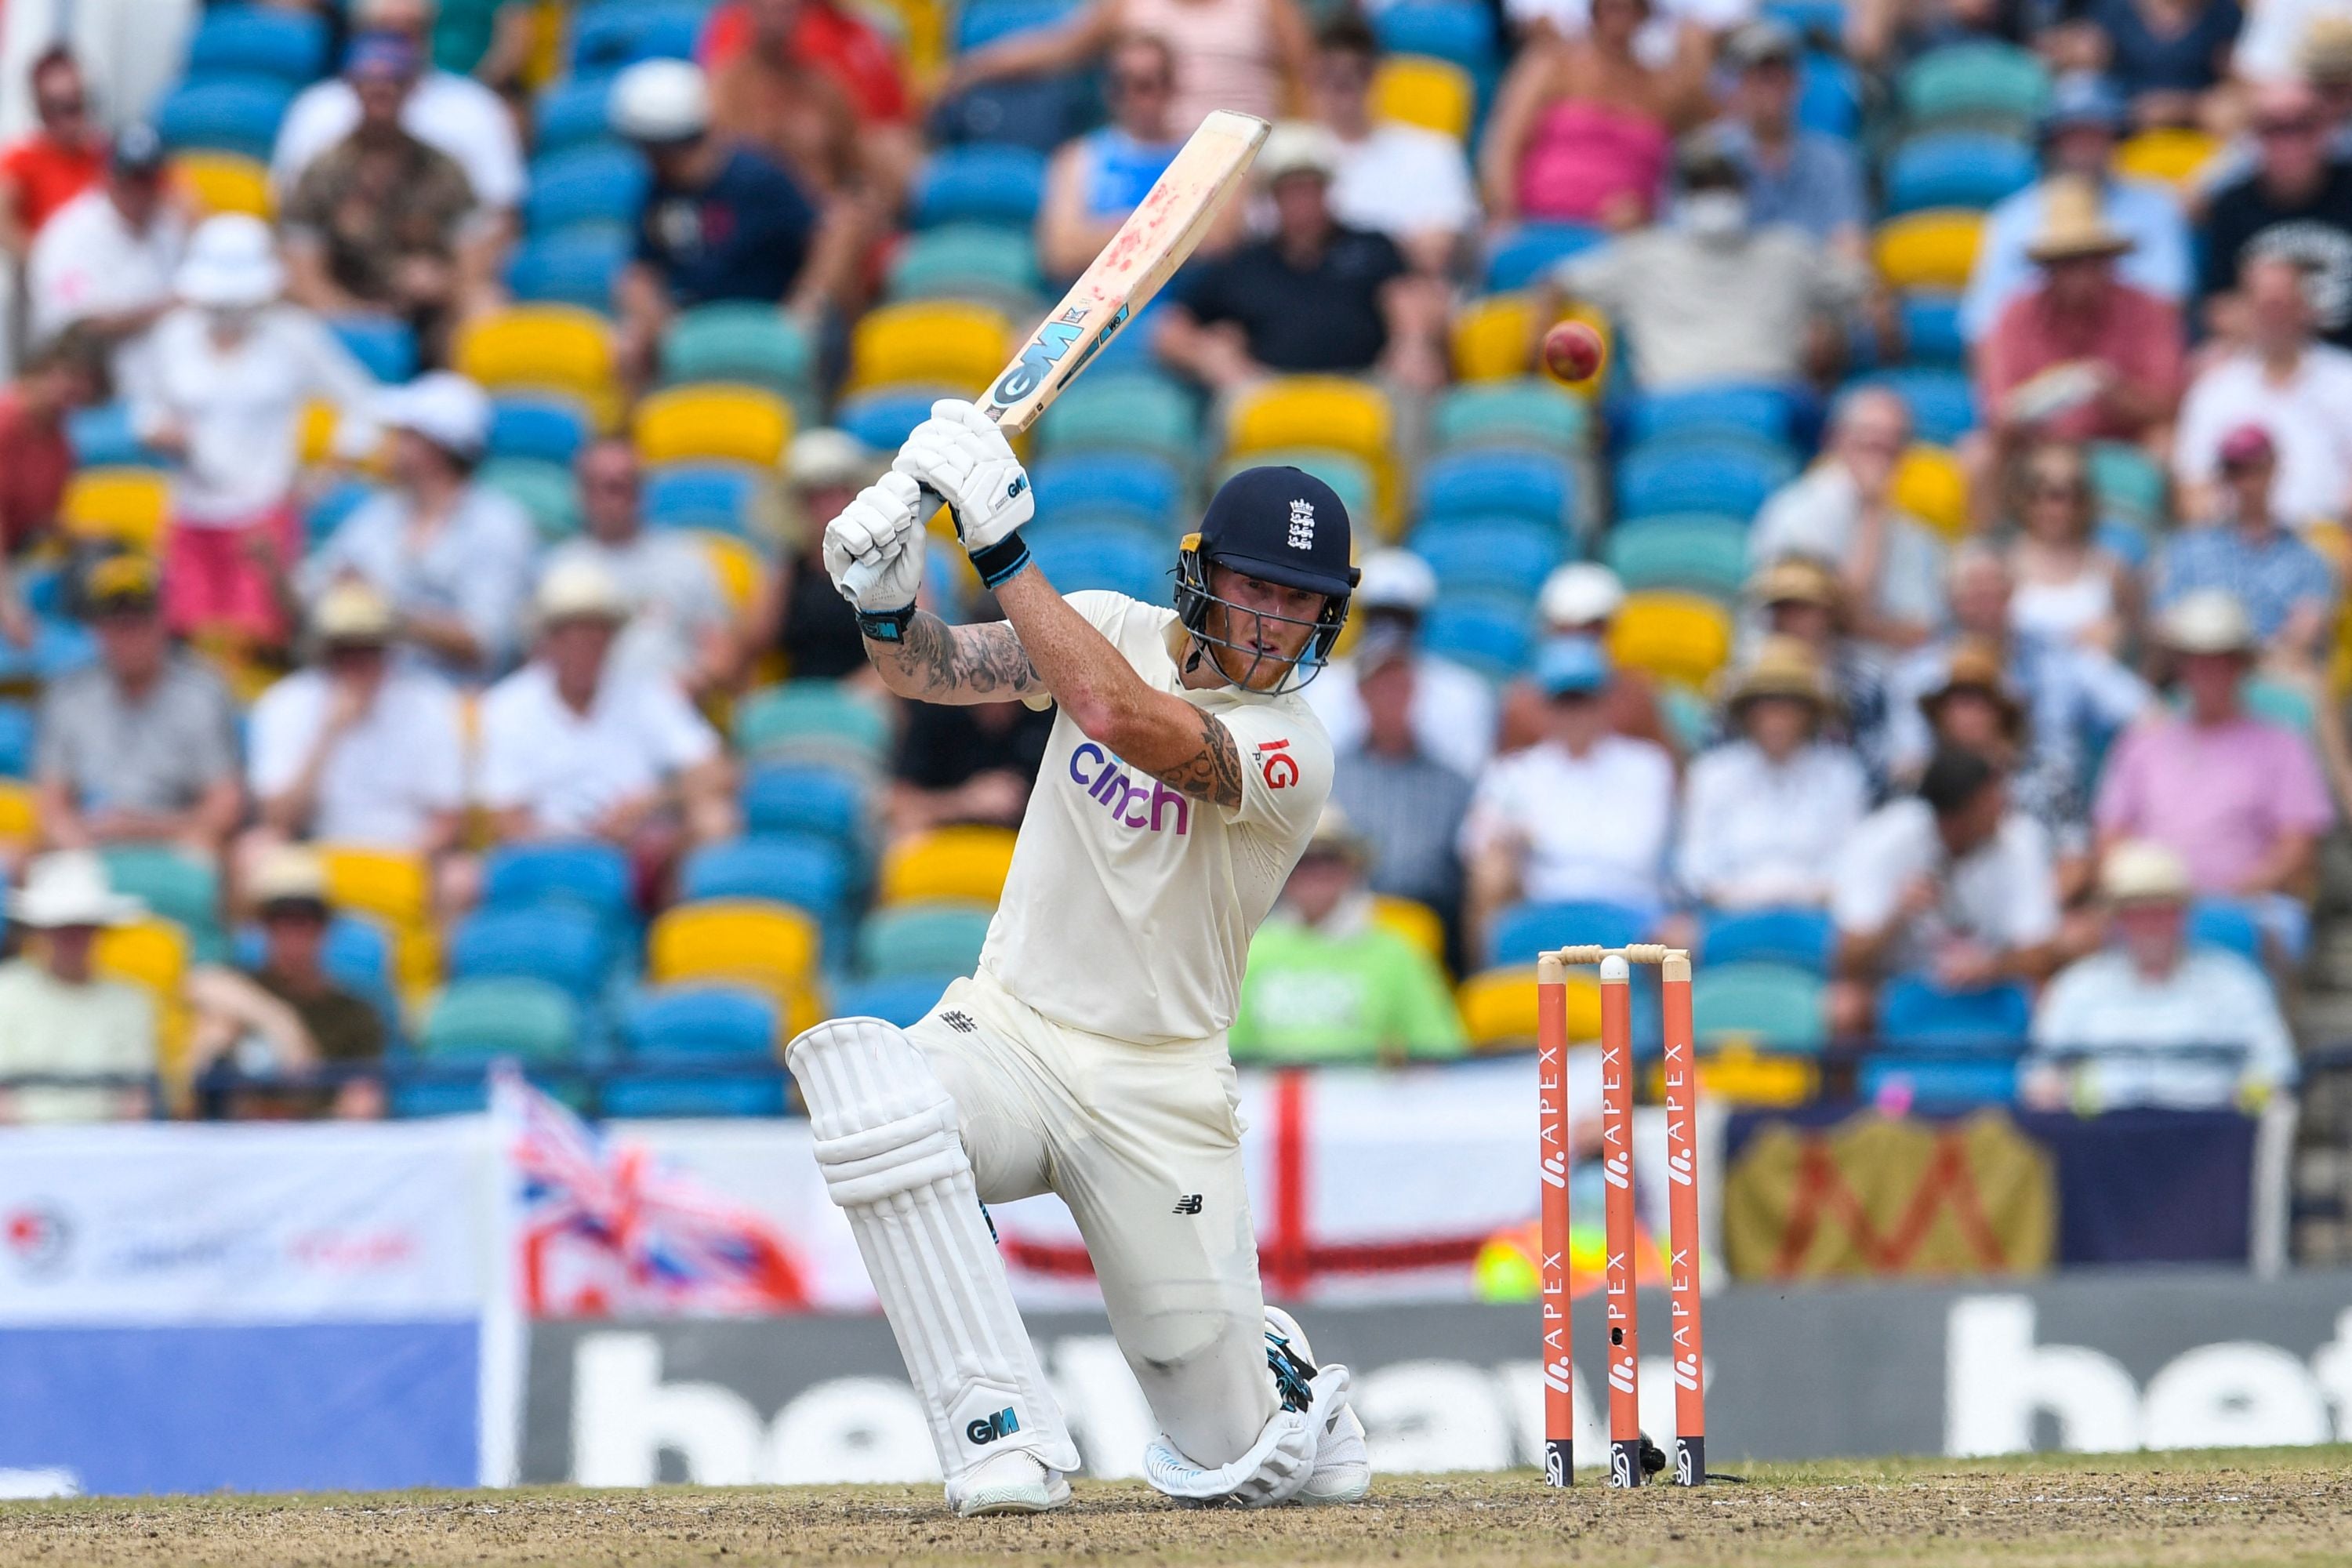 Ben Stokes has dragged England out of many a mire during his career